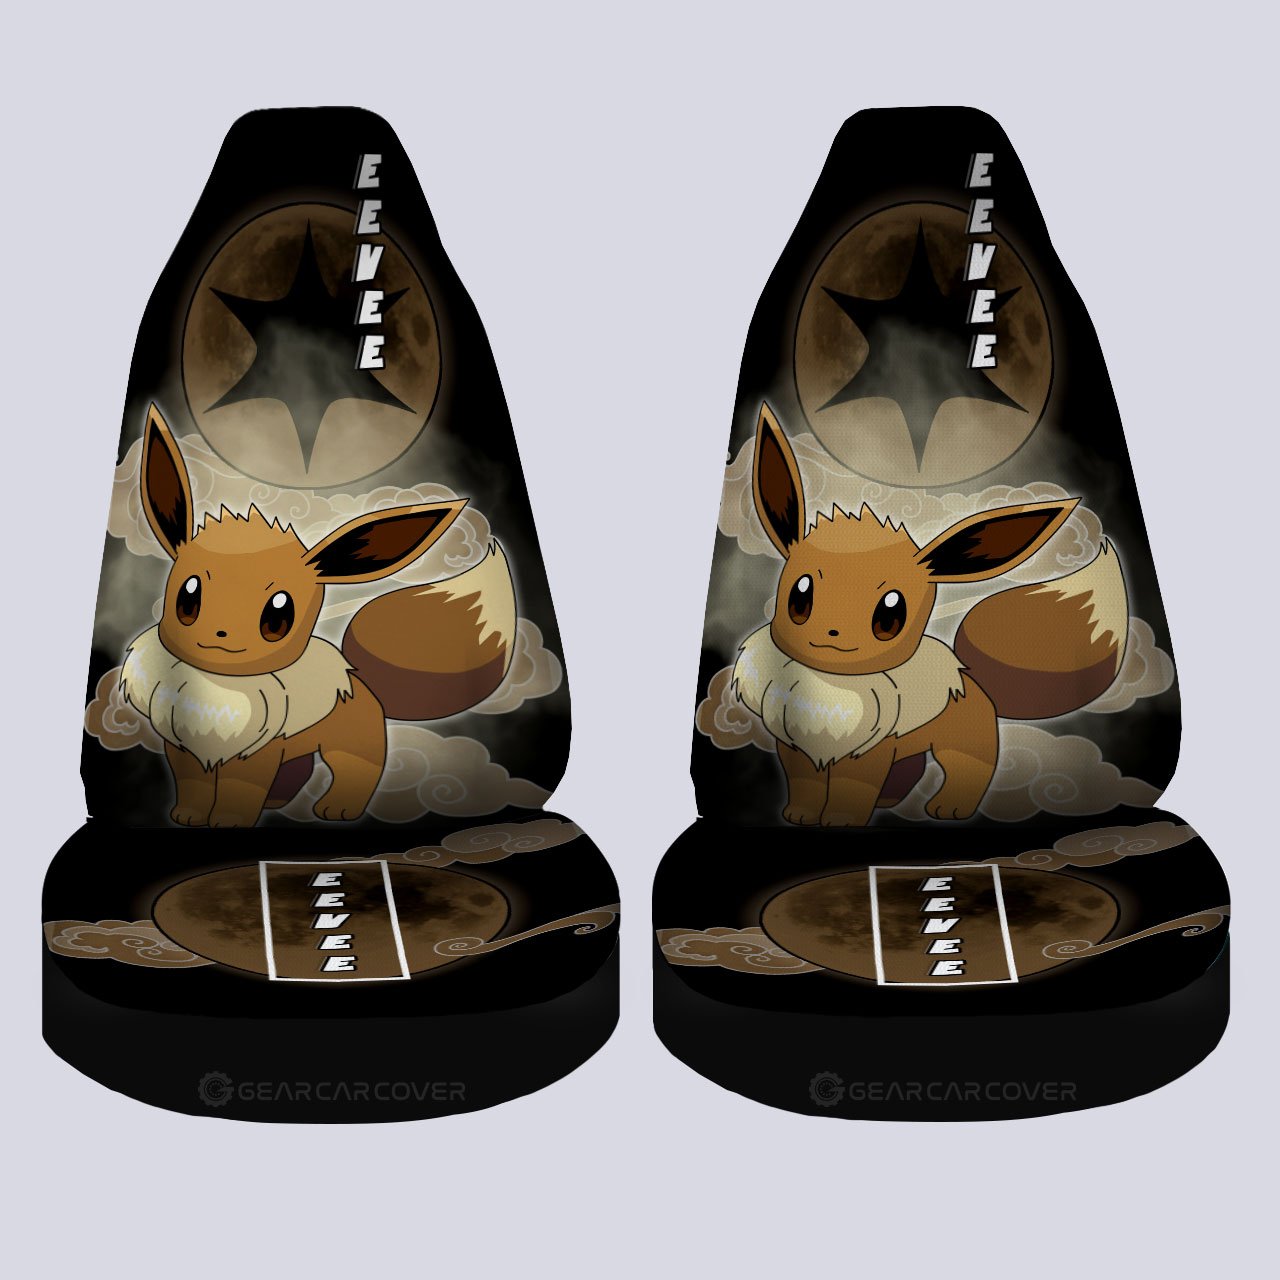 Eevee Car Seat Covers Custom Anime Car Accessories For Anime Fans - Gearcarcover - 4